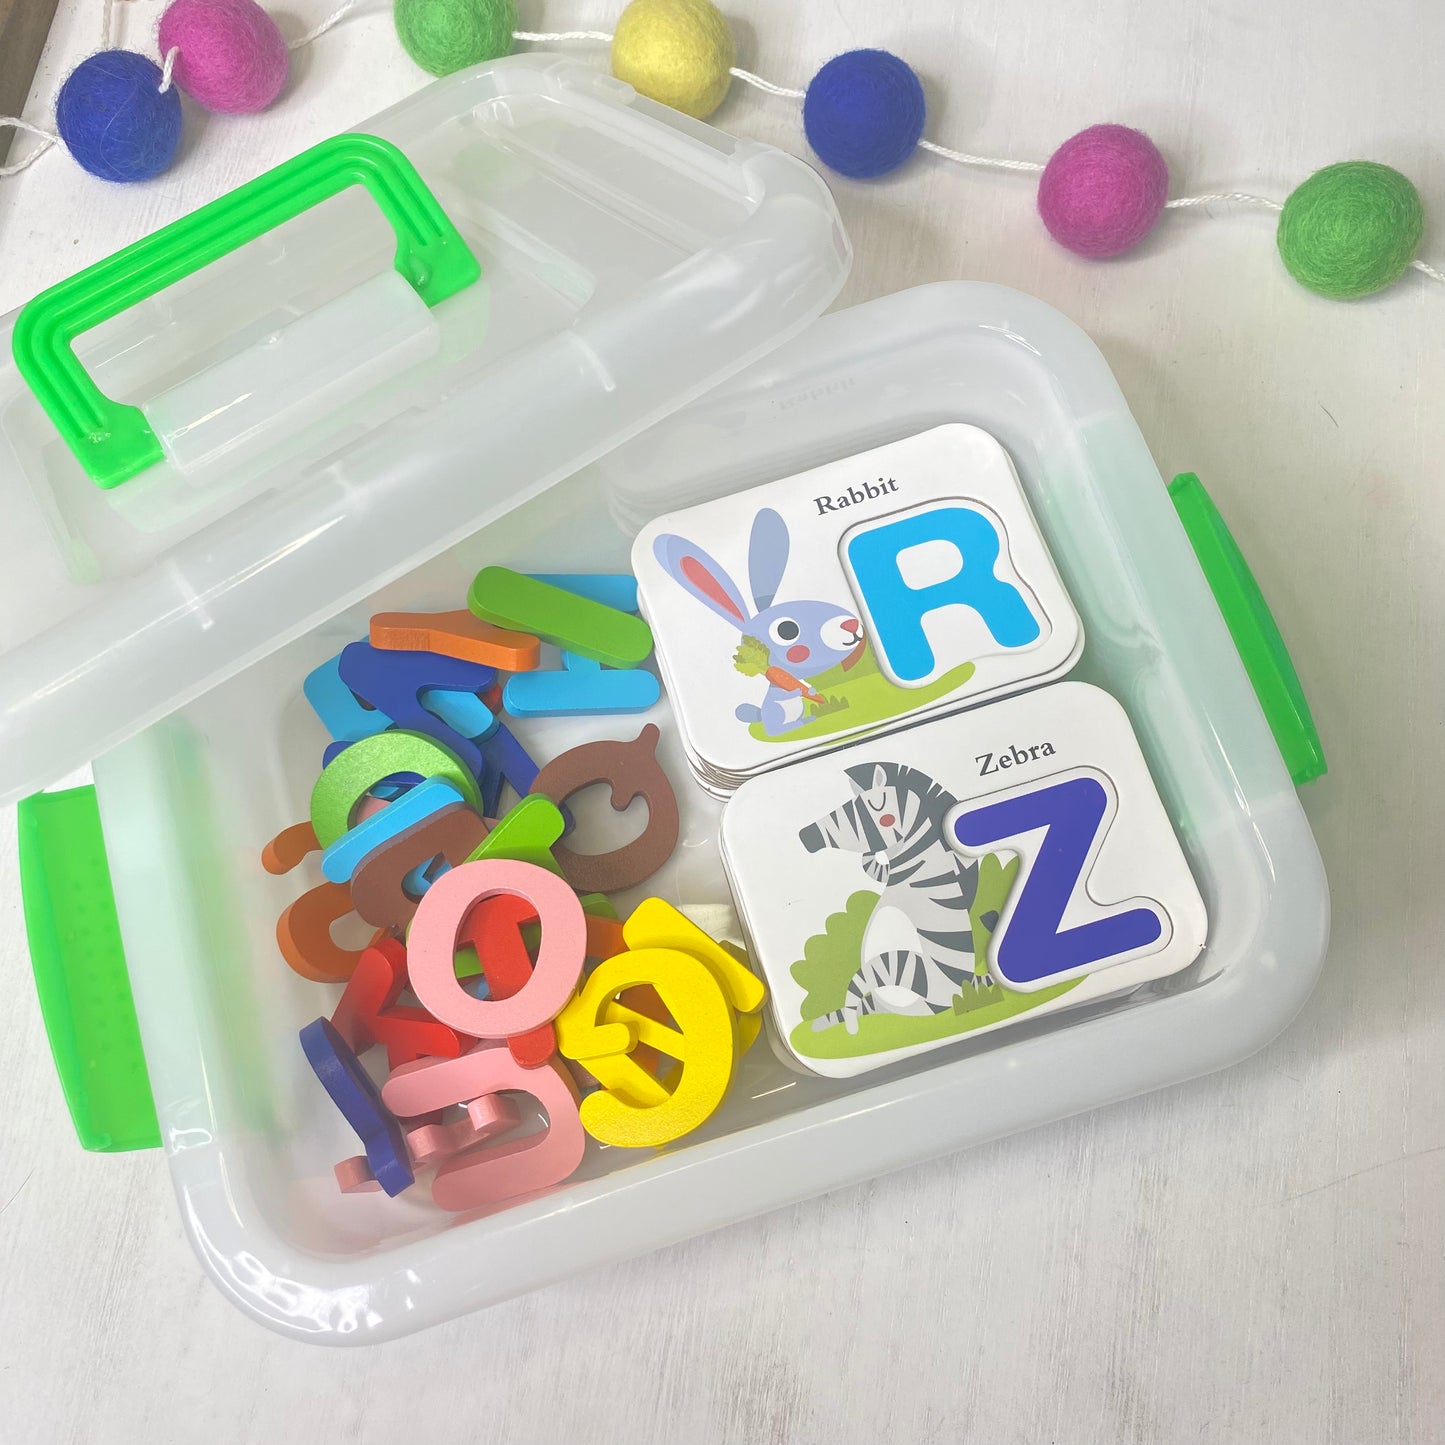 Best educational tool for preschoolers! Develop fine motor skills and spatial reasoning while learning their letters with hands-on learning! 